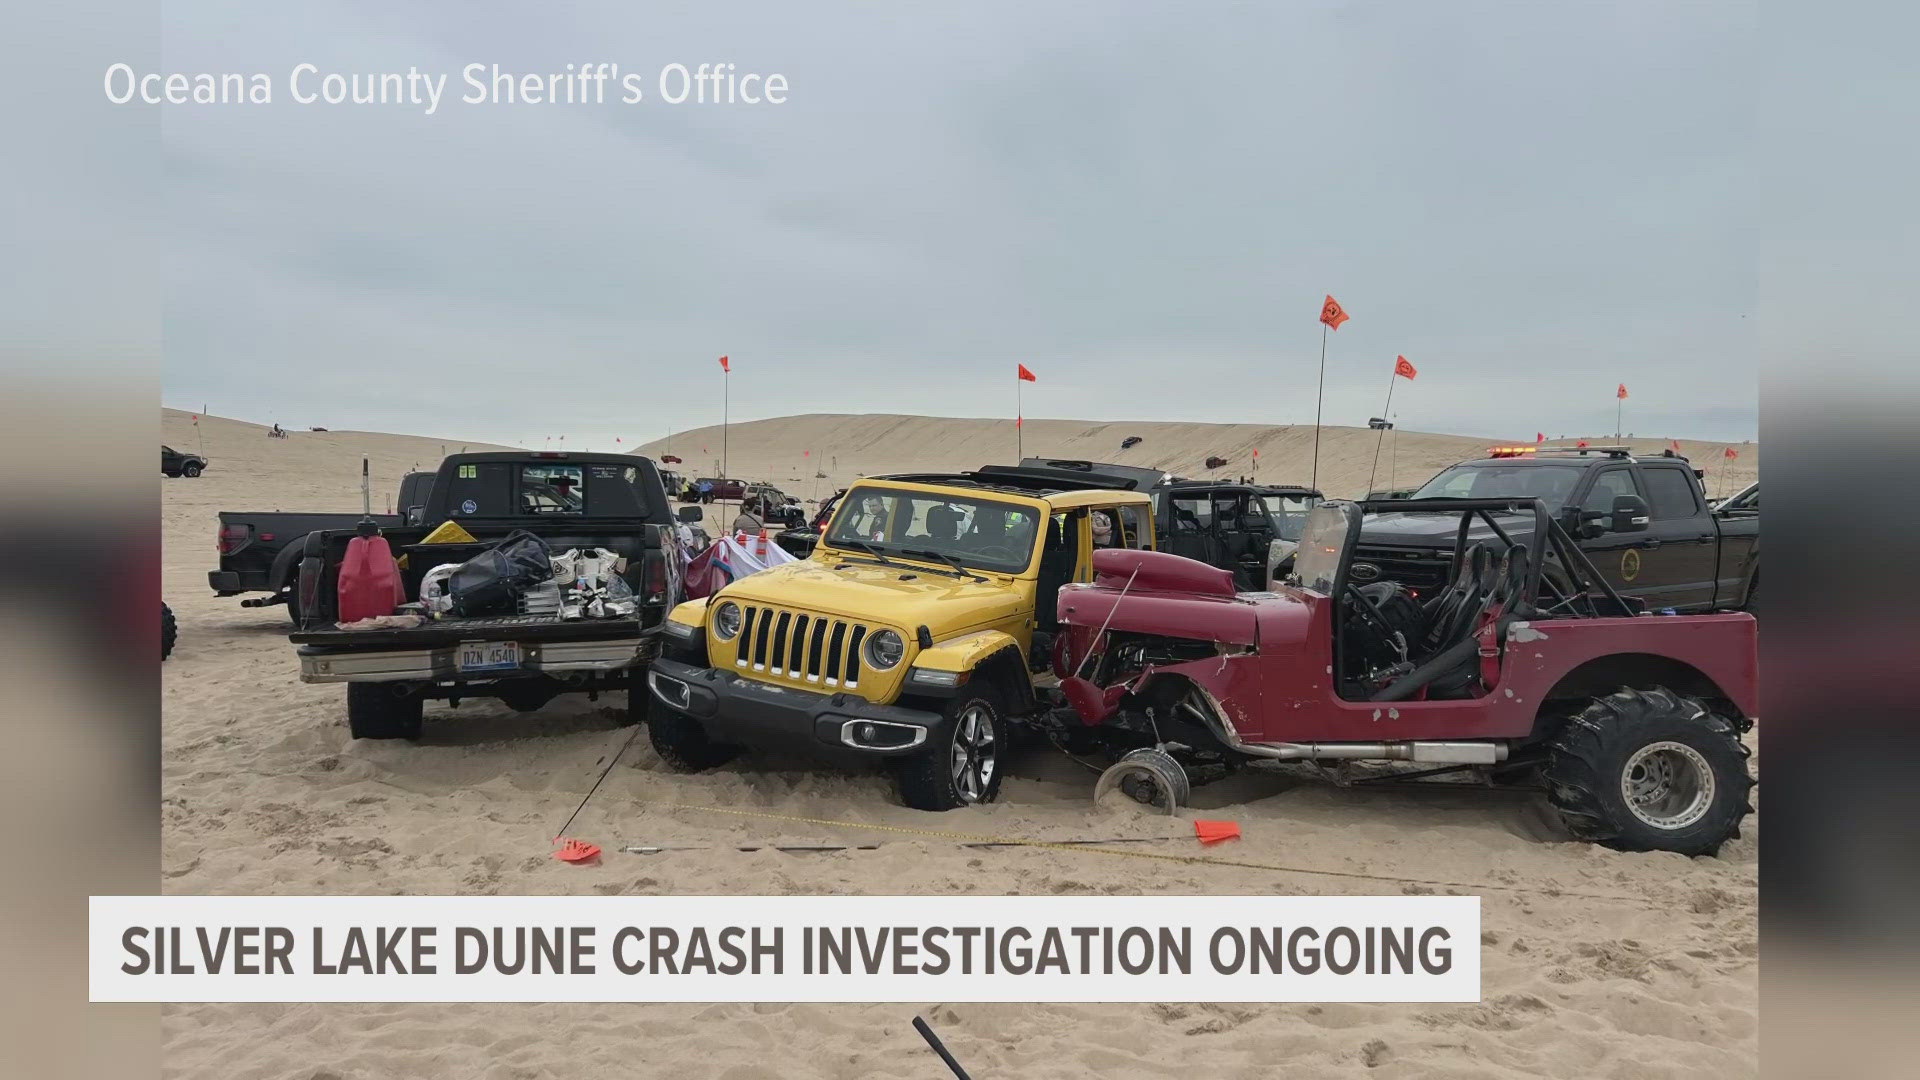 Accidents on the dunes are very common but usually don't involve drag racing, the Oceana County Sheriff said during the update.